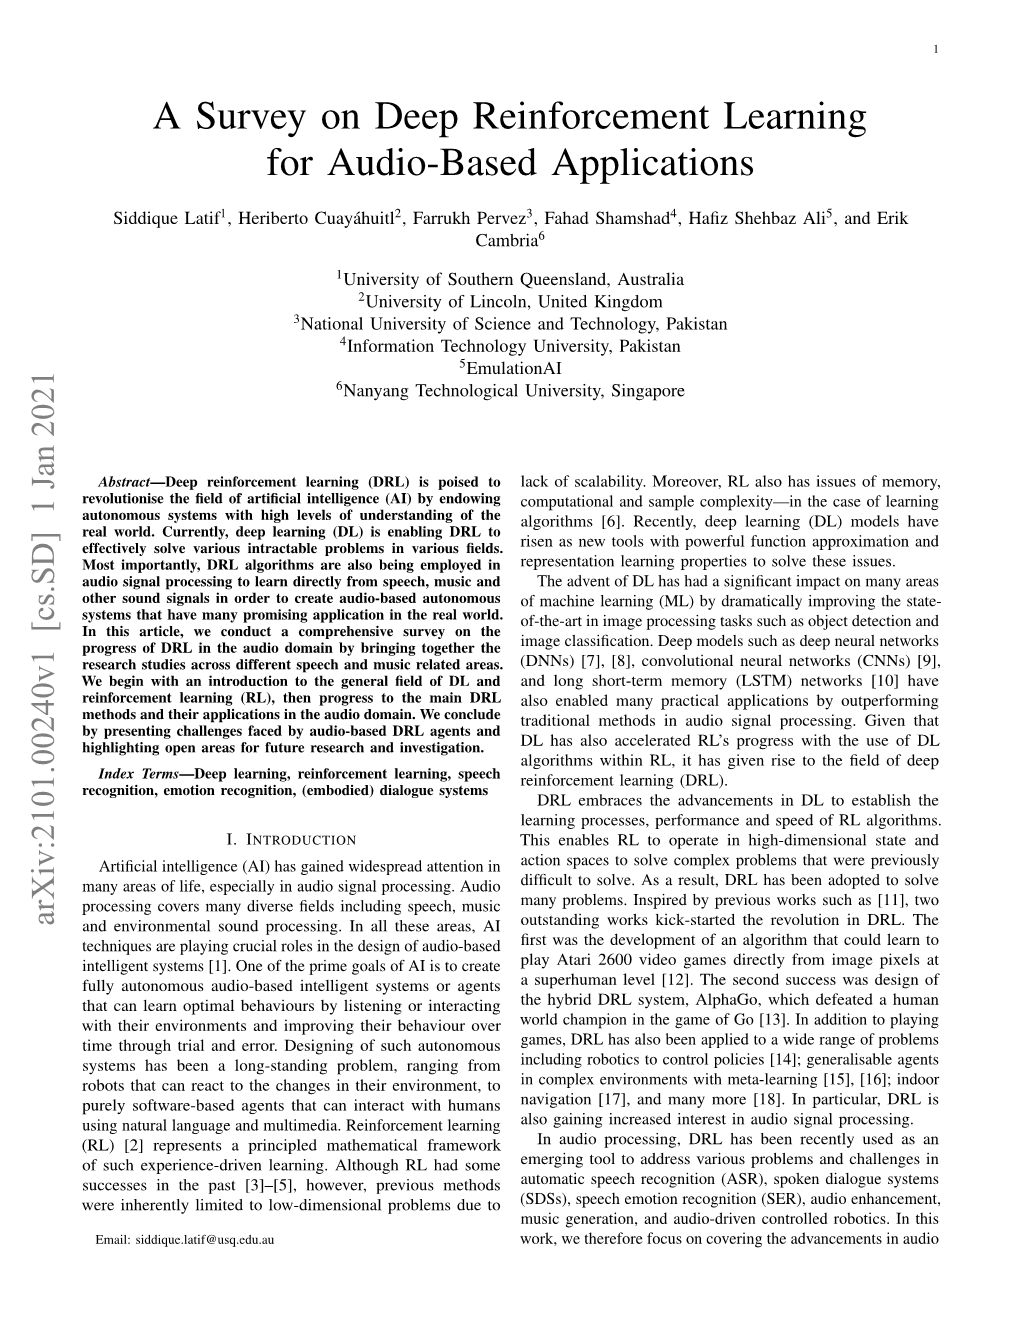 A Survey on Deep Reinforcement Learning for Audio-Based Applications